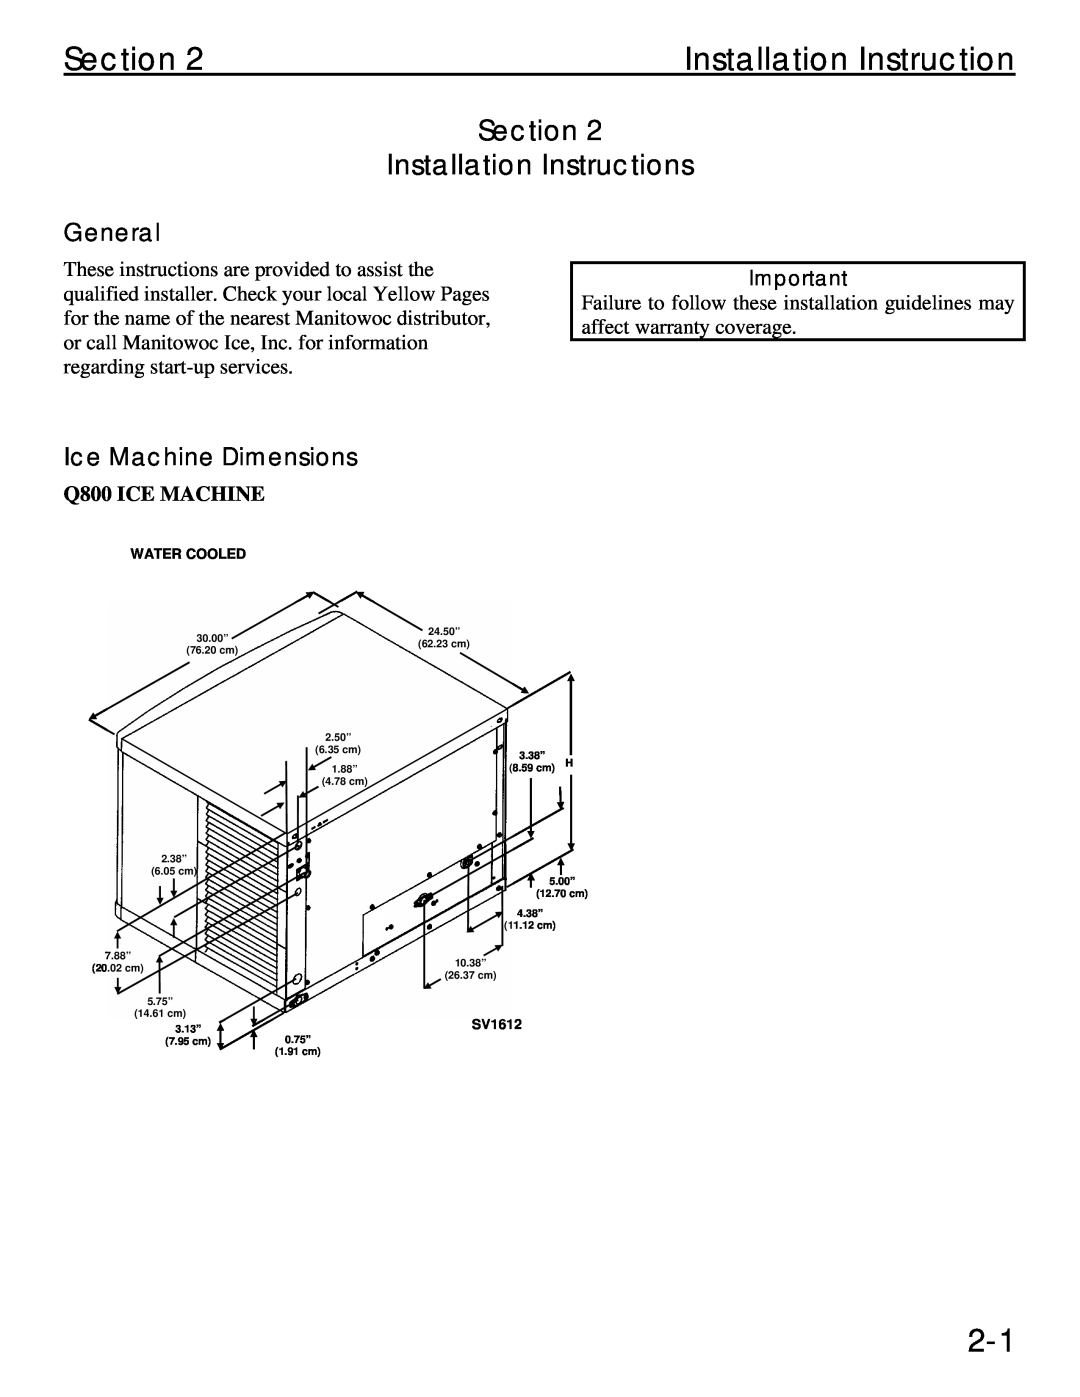 Manitowoc Ice Q 800 manual Section Installation Instructions, General, Ice Machine Dimensions, Q800 ICE MACHINE 